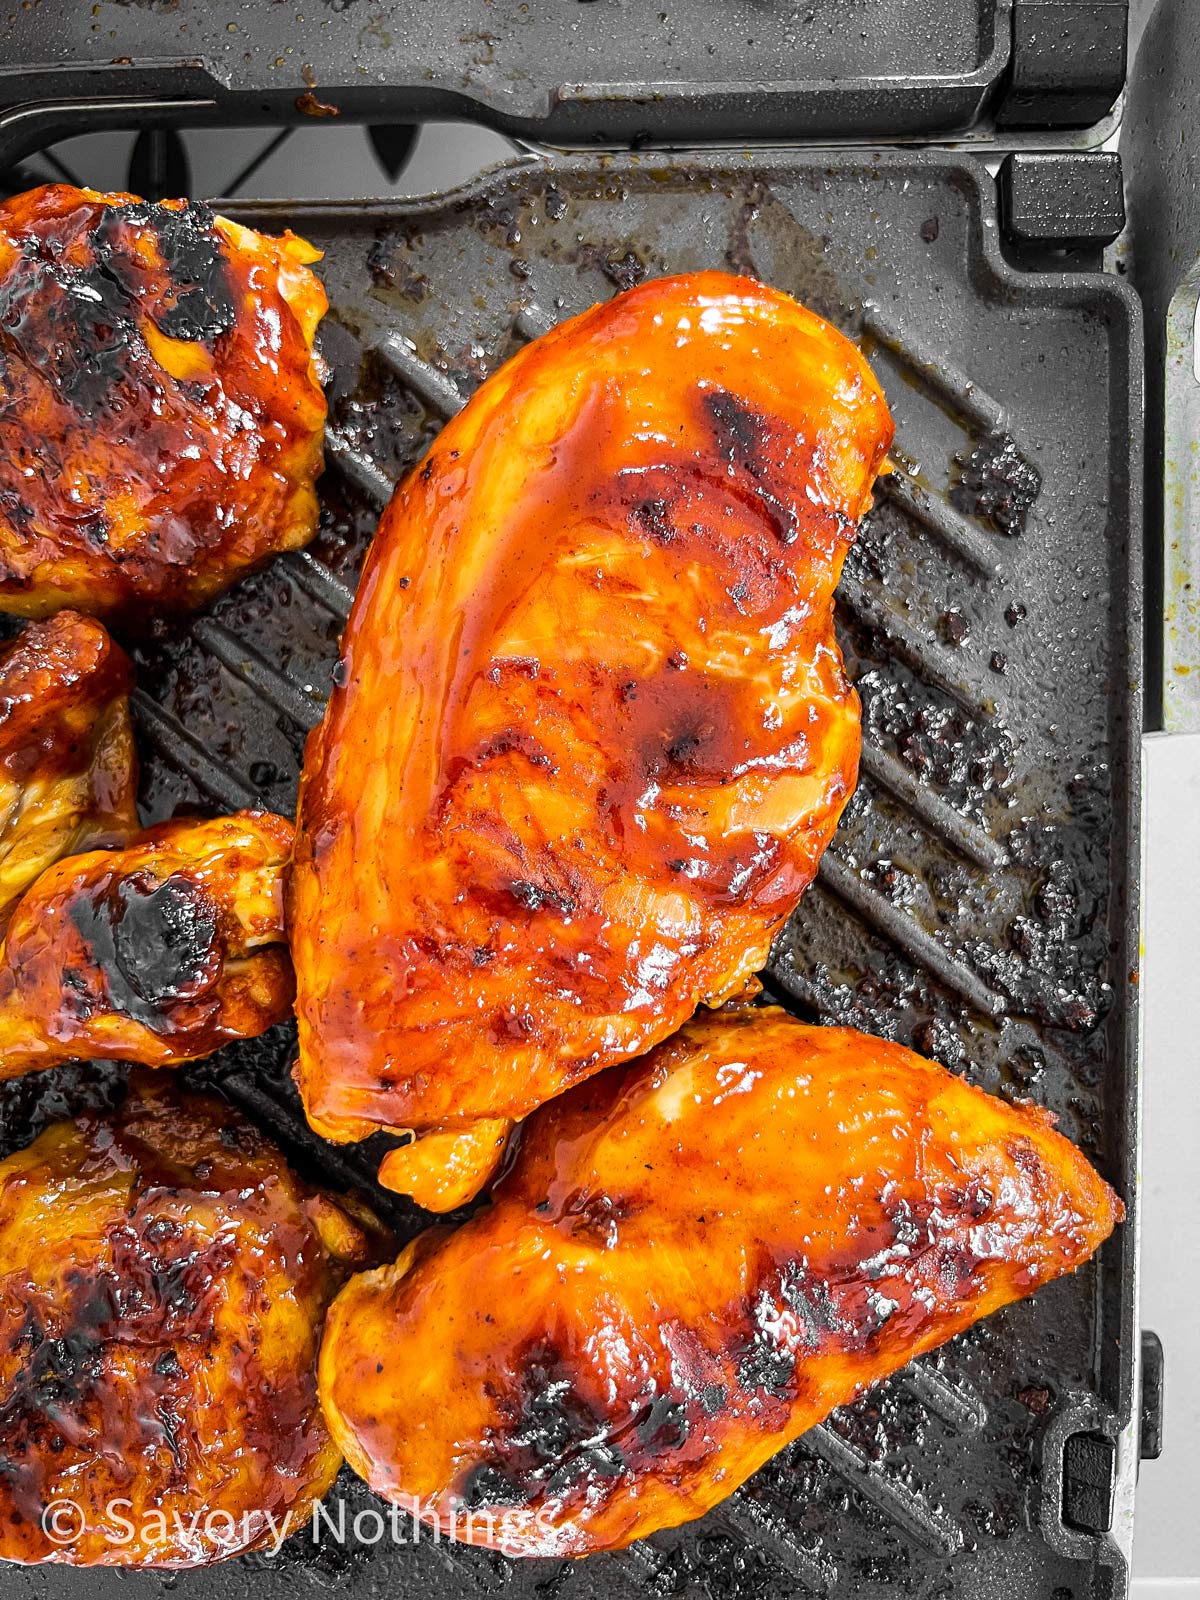 bbq chicken on grill plate